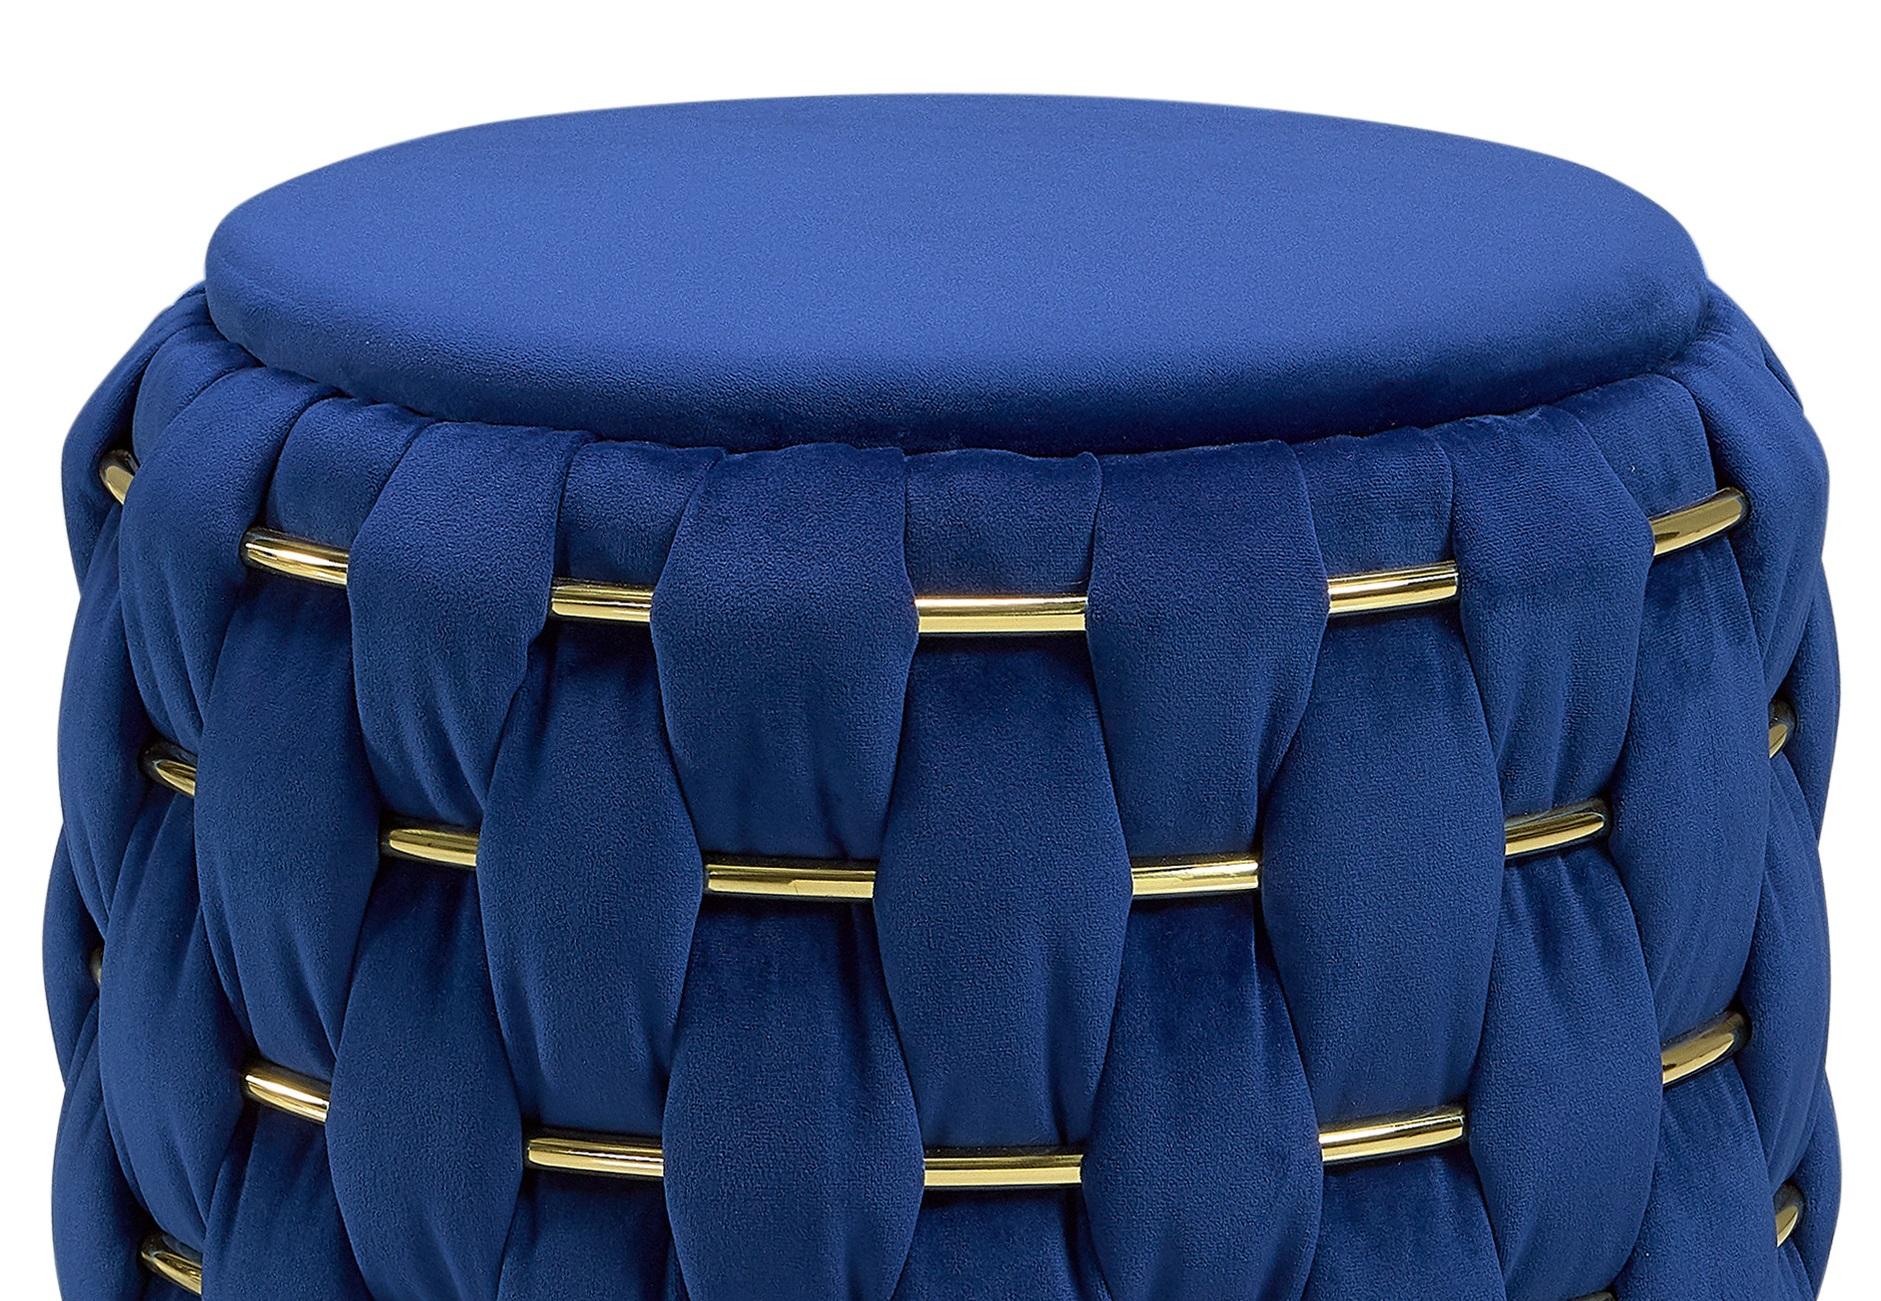 Lust Ottoman by Memoir Essence
Dimensions: D 45 x W 45 x H 50 cm.
Materials: Polished brass and blue velvet fabric.

Lust Ottoman is an extension of Lust collection to a different versatility with same refinement. Besides being a small piece, this